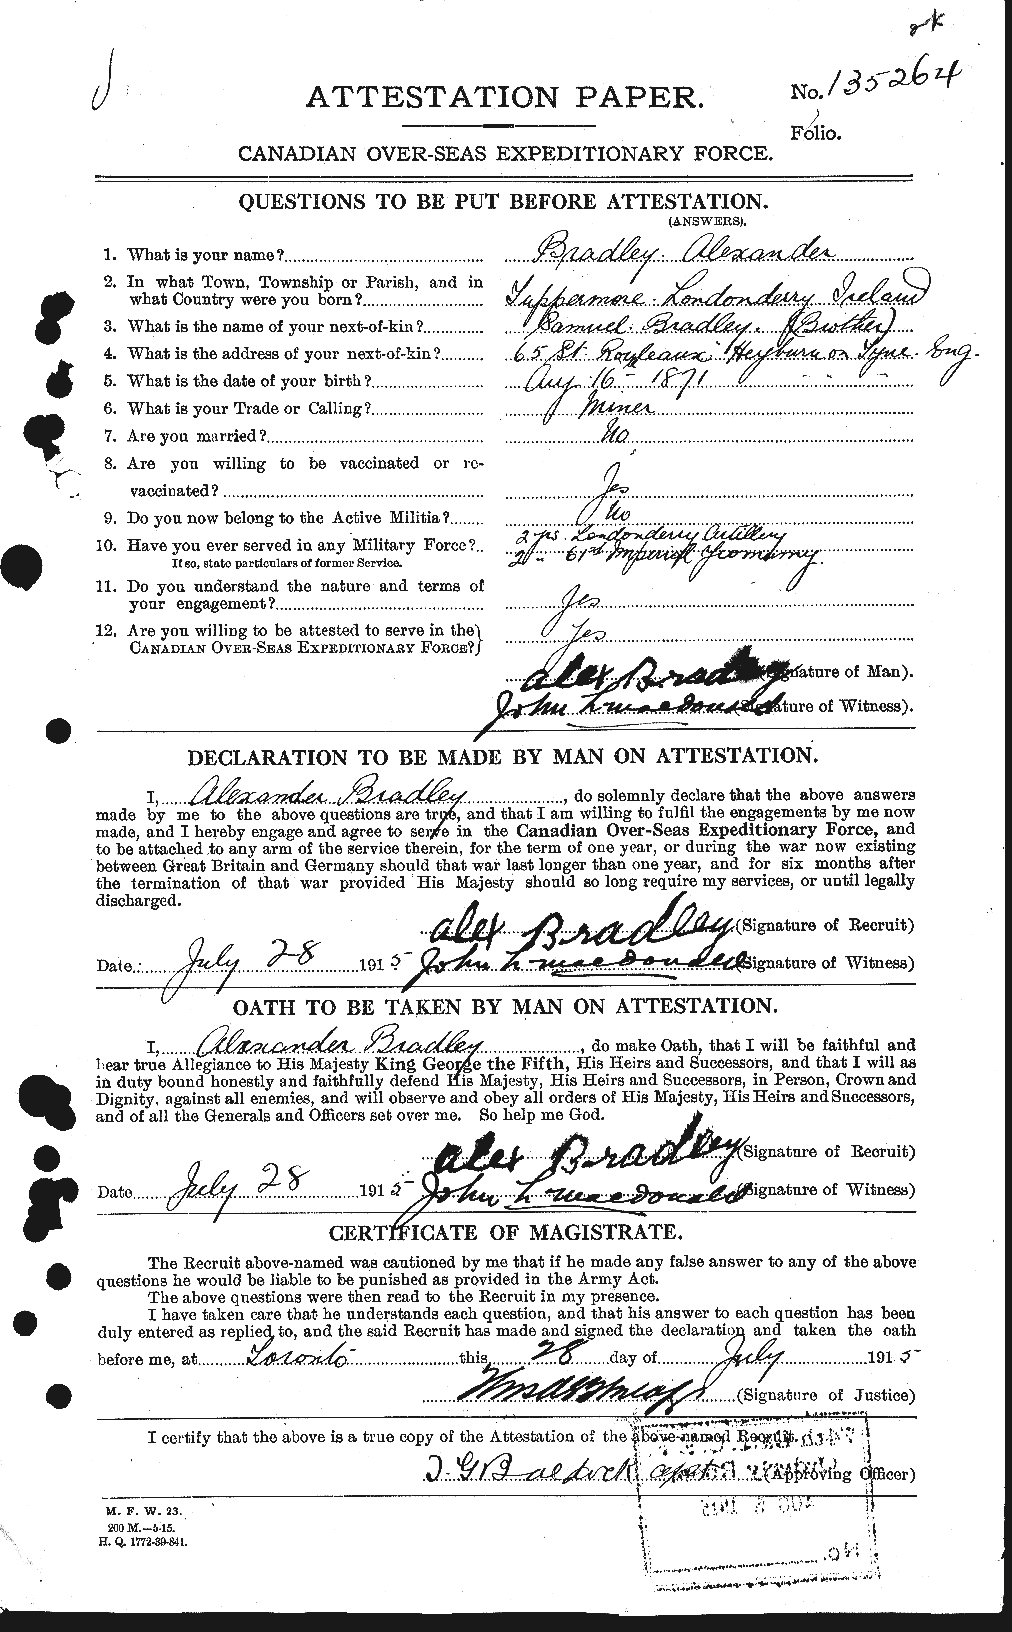 Personnel Records of the First World War - CEF 256883a